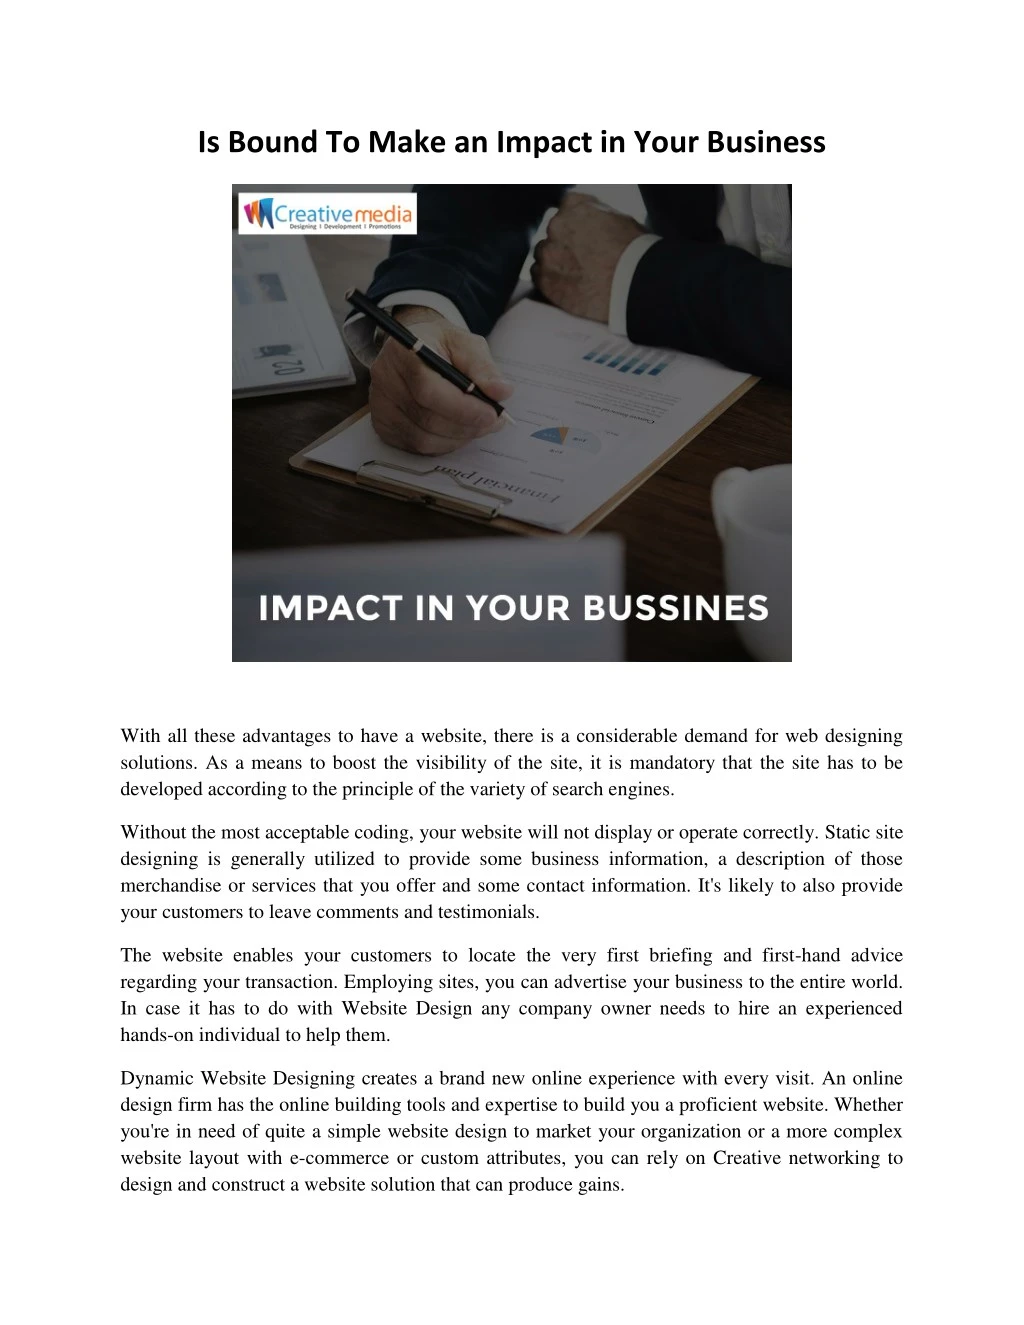 is bound to make an impact in your business